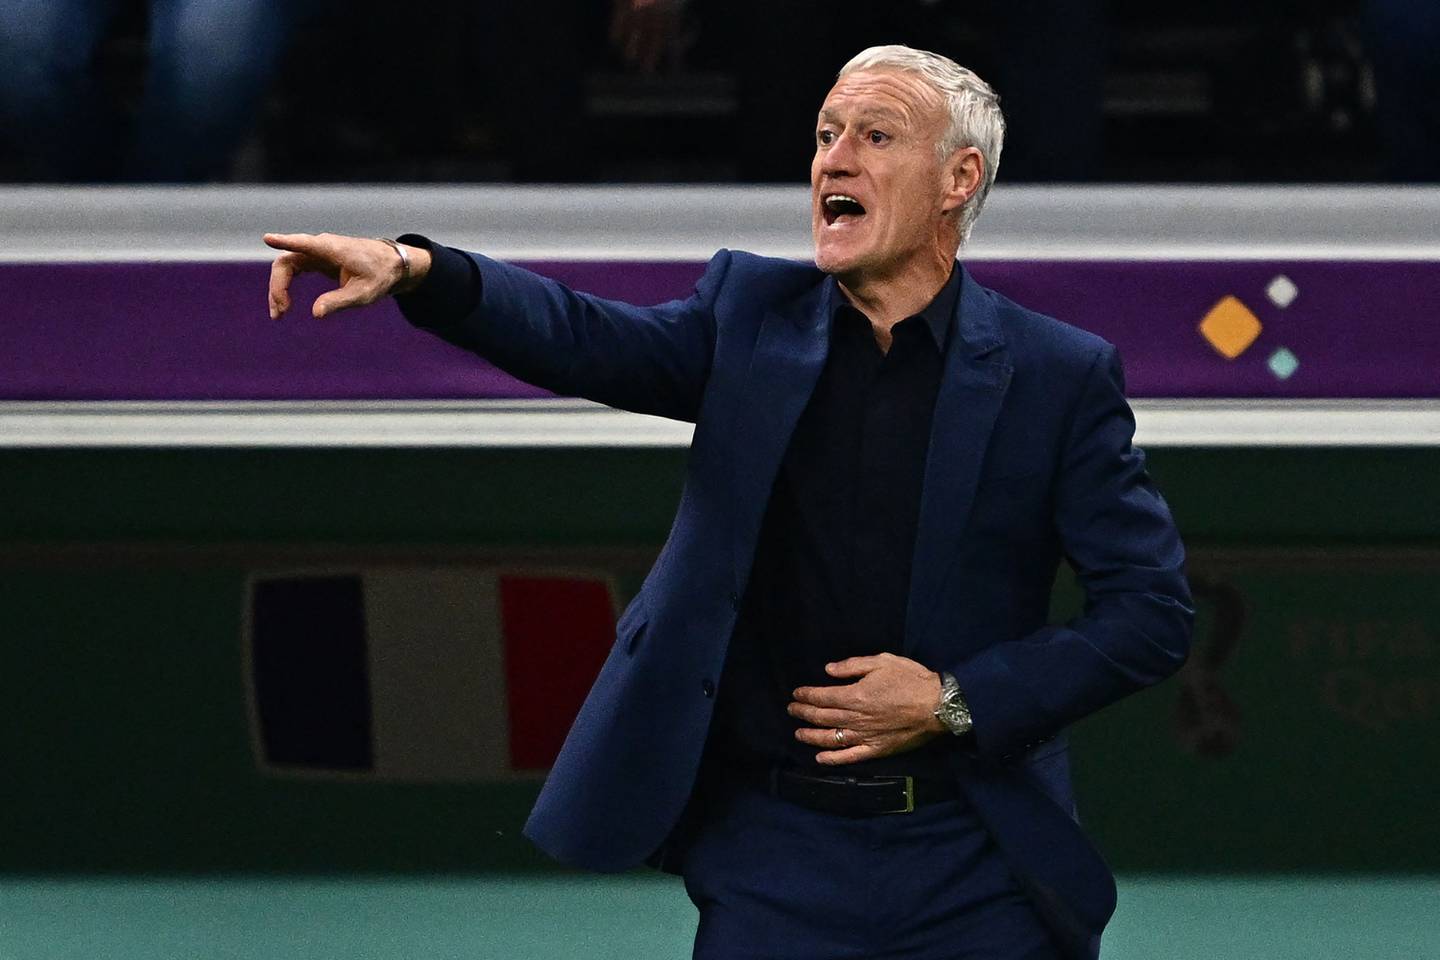 France manager Didier Deschamps is expecting a tough match against Morocco side who have conceded just one goal so far at the World Cup. AFP